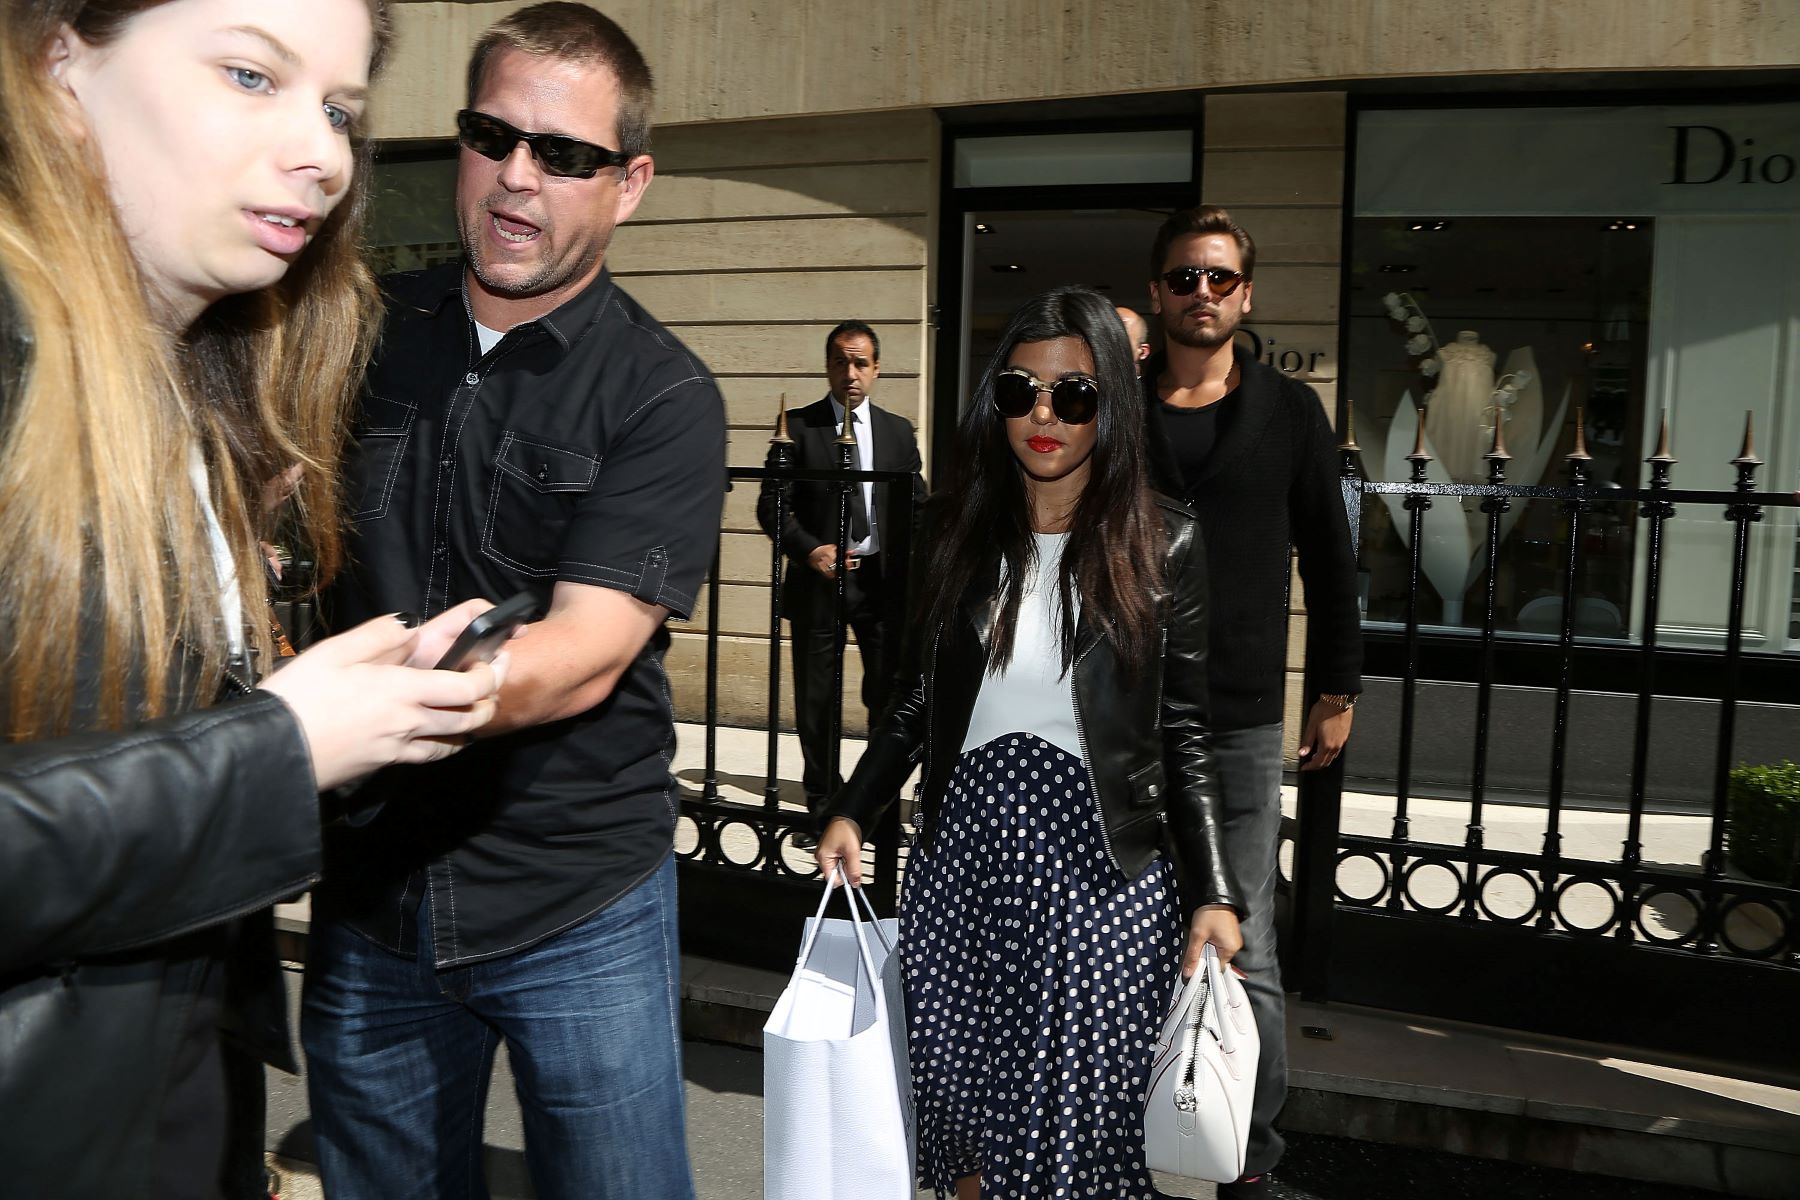 Kourtney Kardashian and Scott Disick leaving a Baby Dior store in Paris, France, in 2014